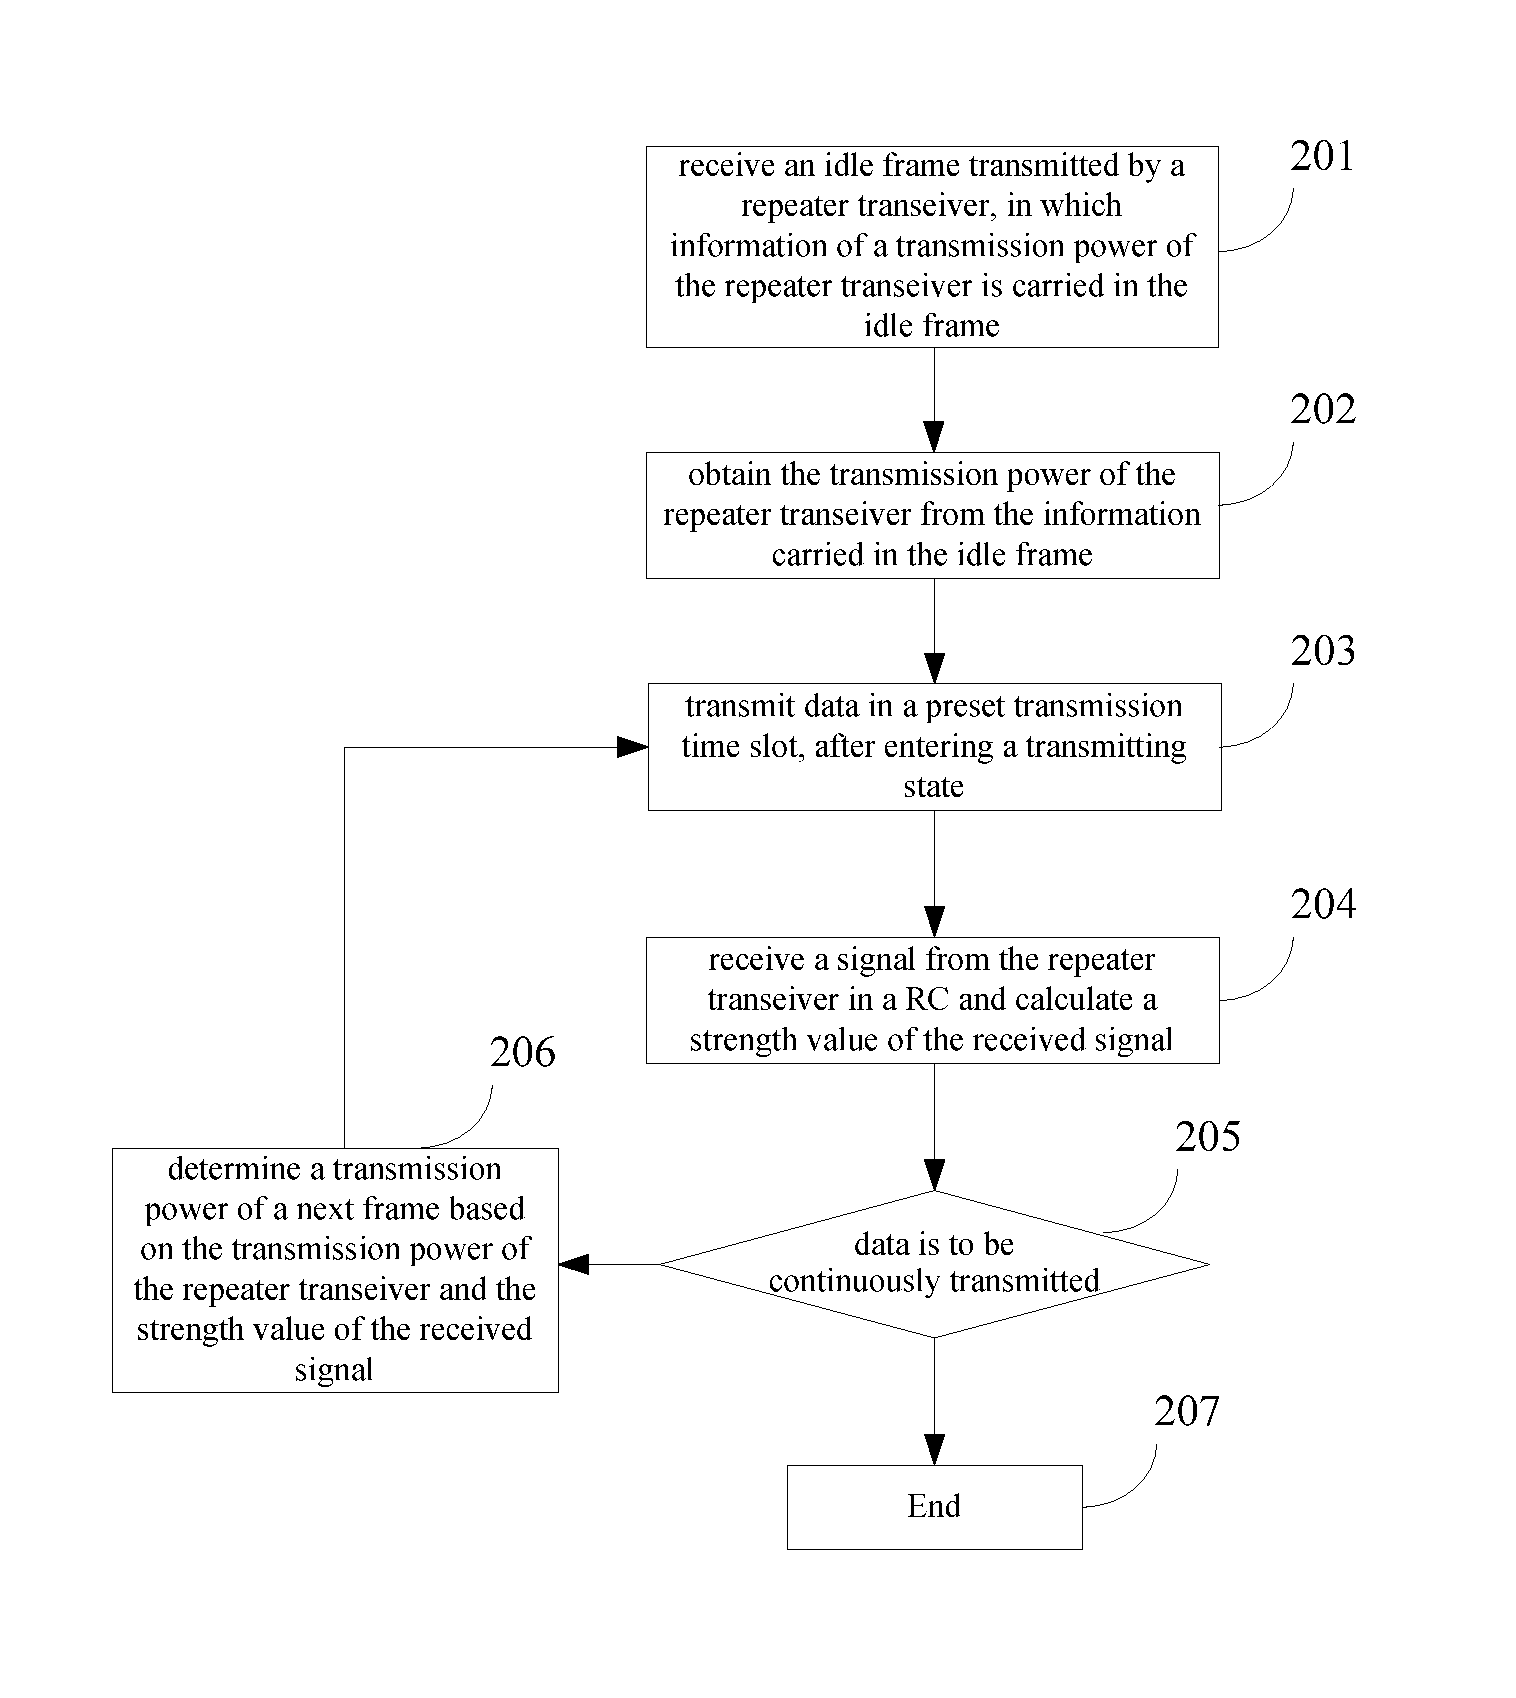 Terminal in digital mobile radio relay system, transmission power regulation method and system thereof